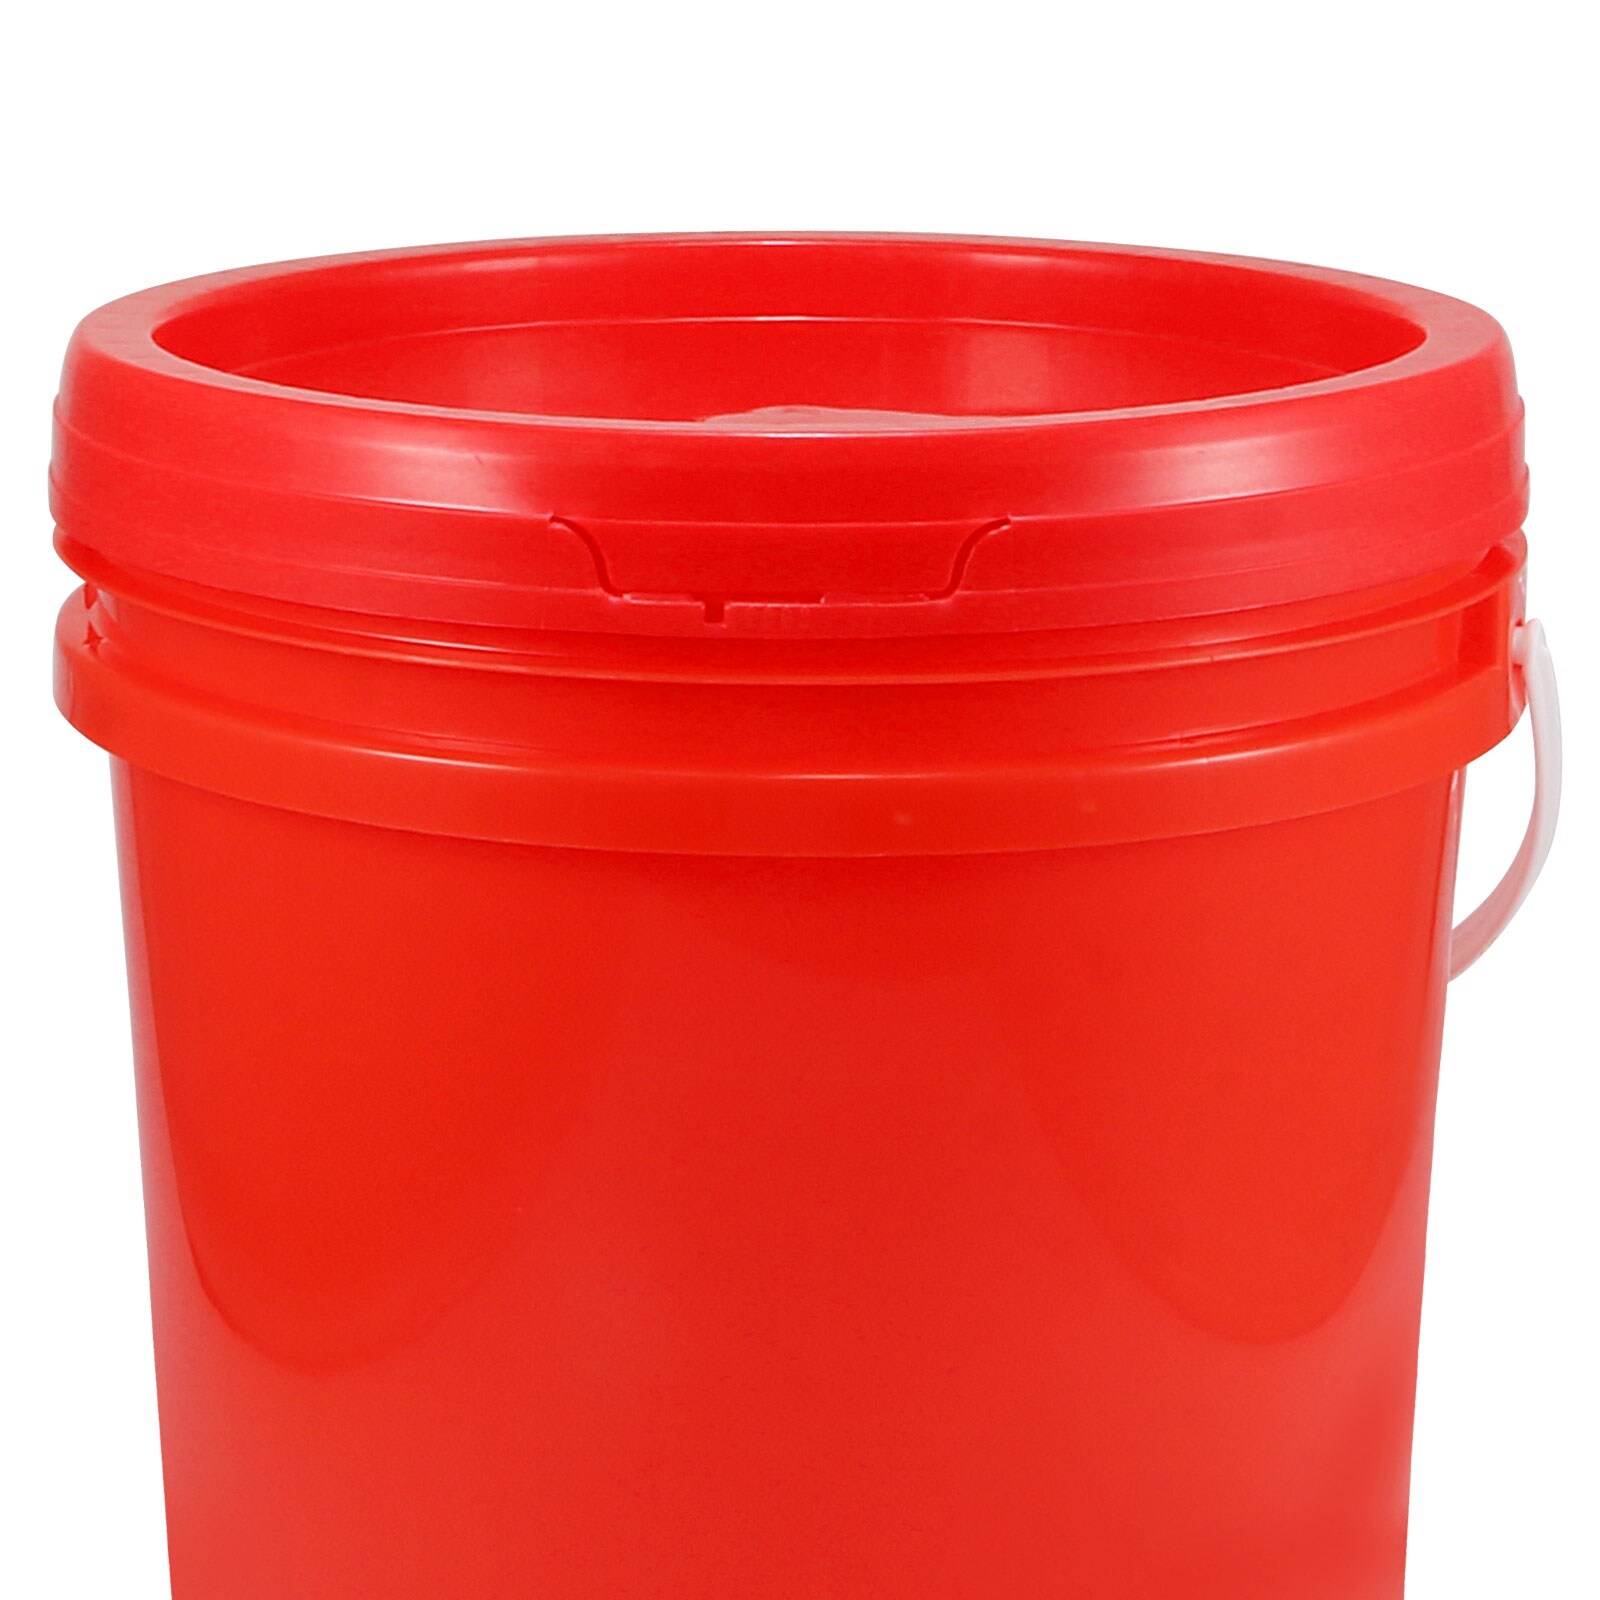 Plastic Paint Pail 2.64Gallon/10L Paint Can with Lid, Red